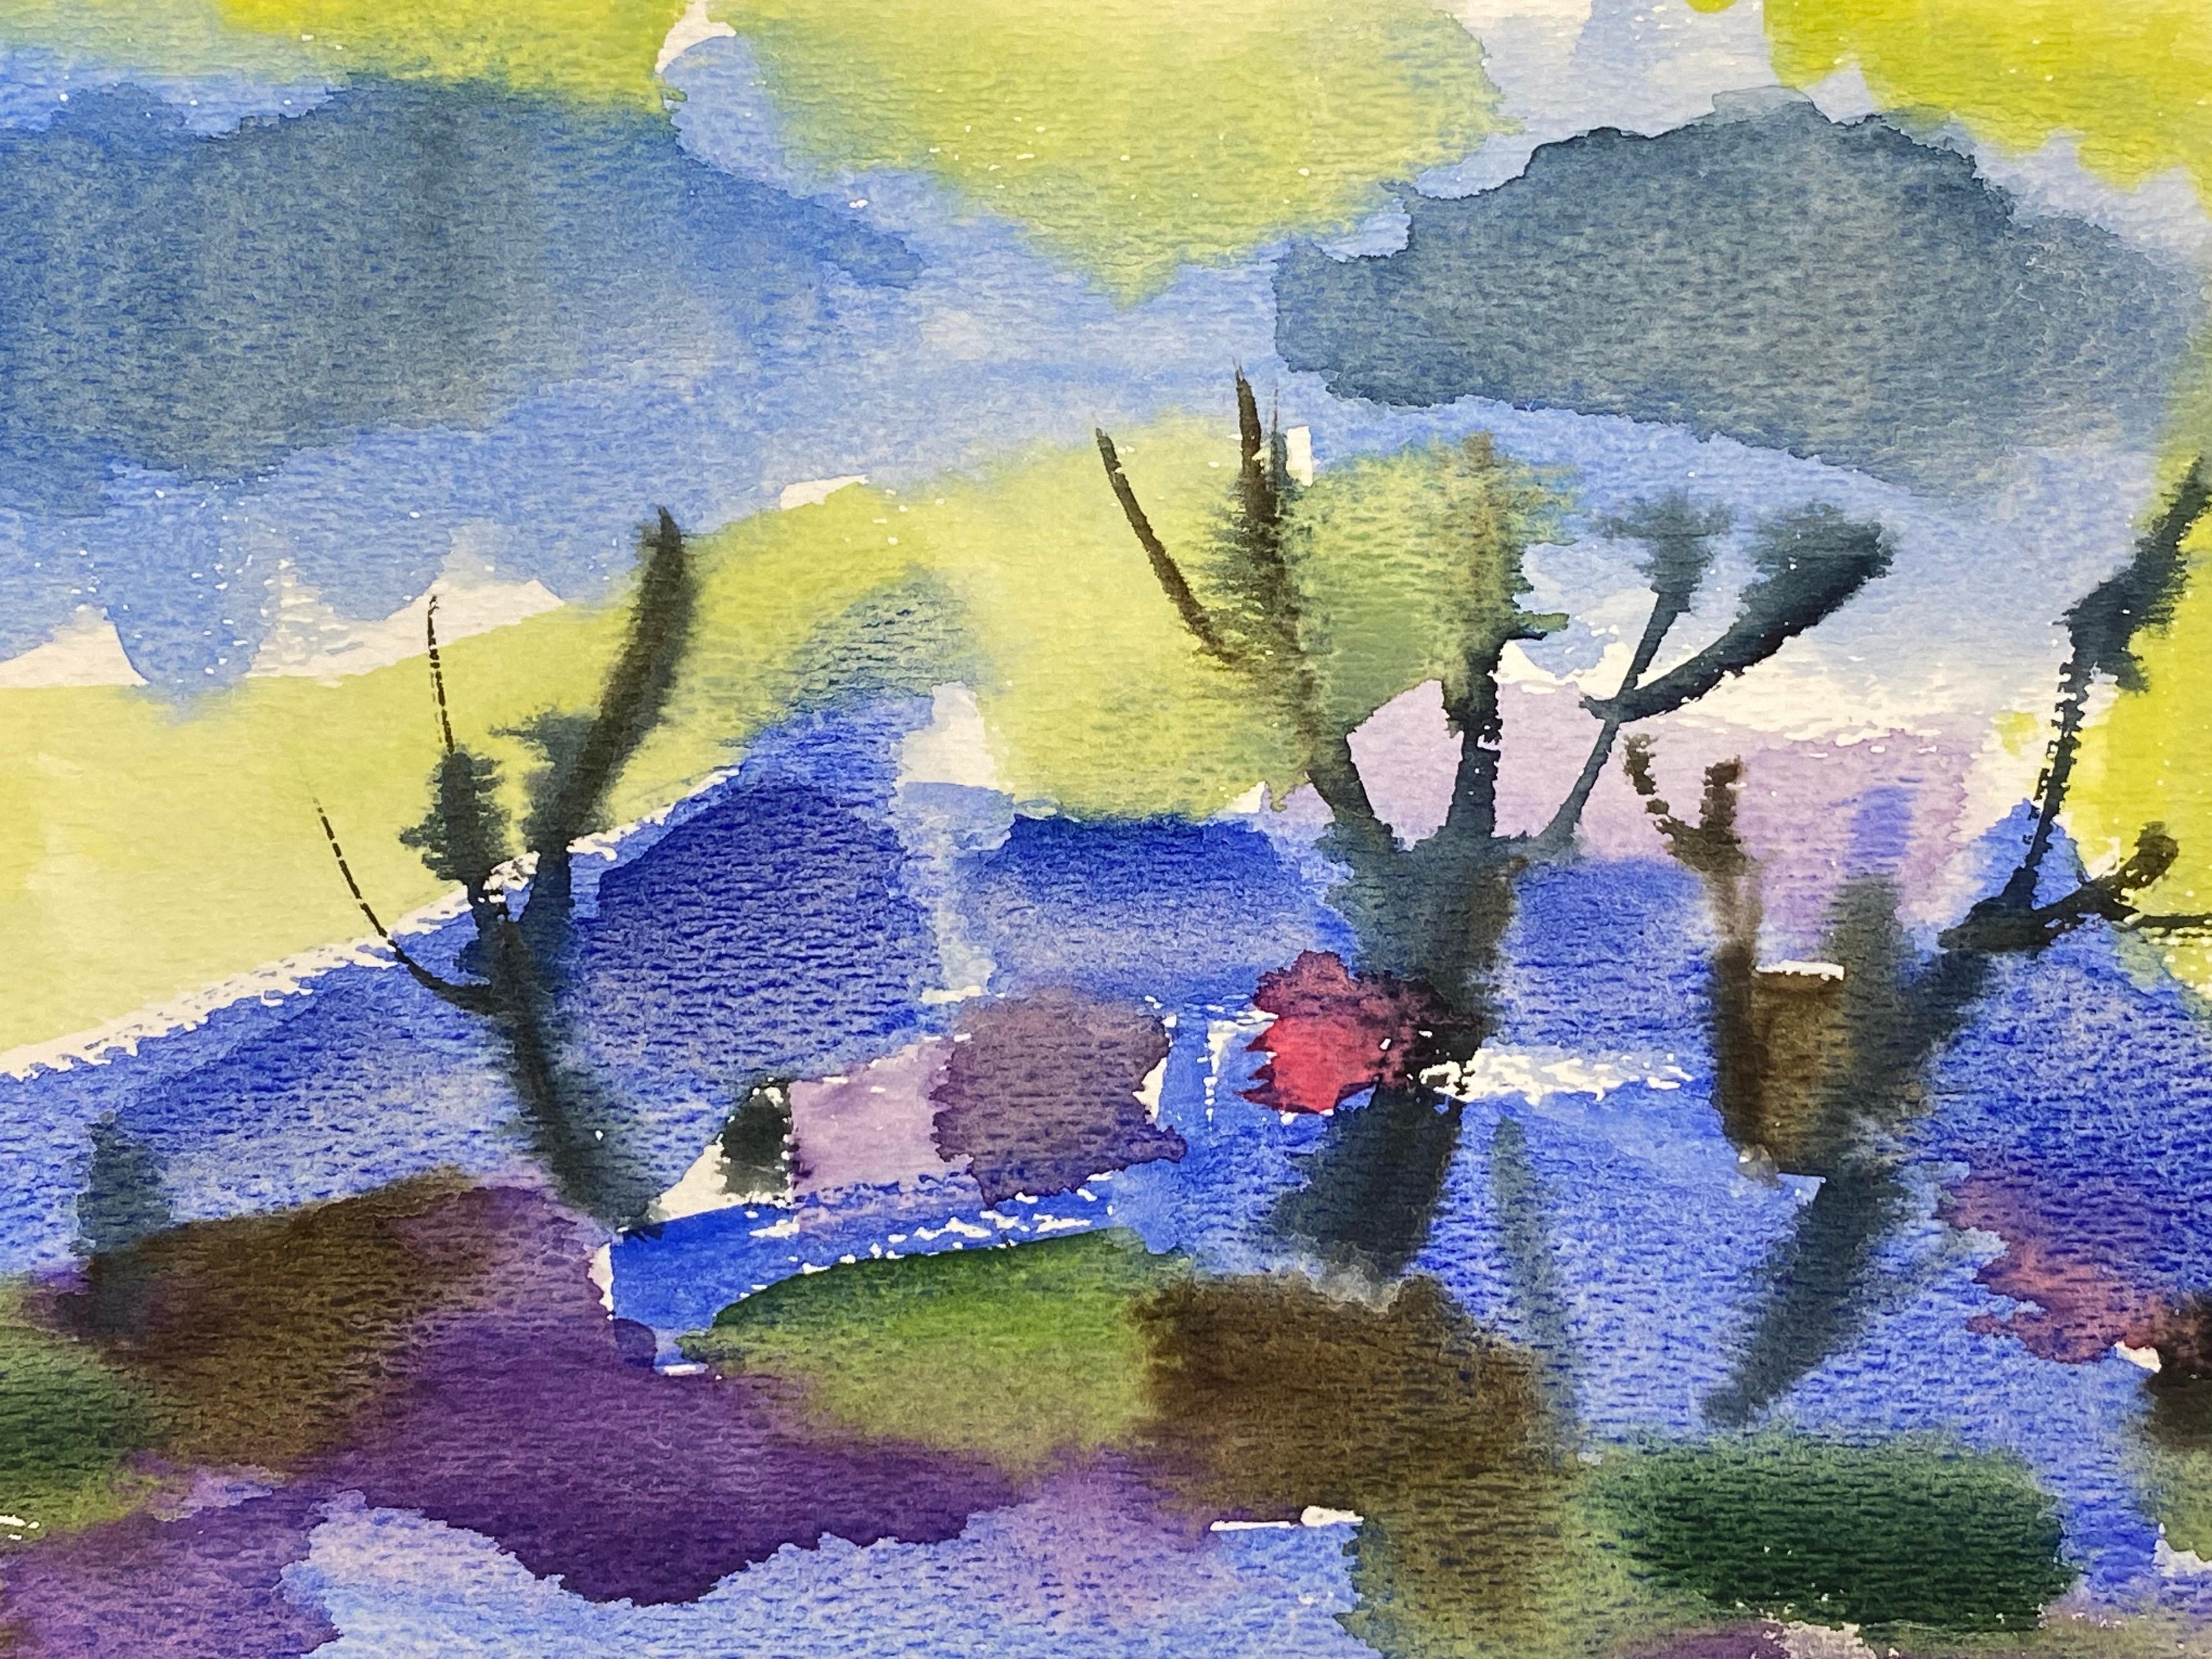 AKOS BIRO (HUNGARIAN 1911-2002)
watercolour/ gouache on card
size: 7.5 x 11 inches

Beautifully colourful, original painting by the very popular and highly regarded Hungarian/ French painter, Akos Biro (1911-2002).

The painting has impeccable